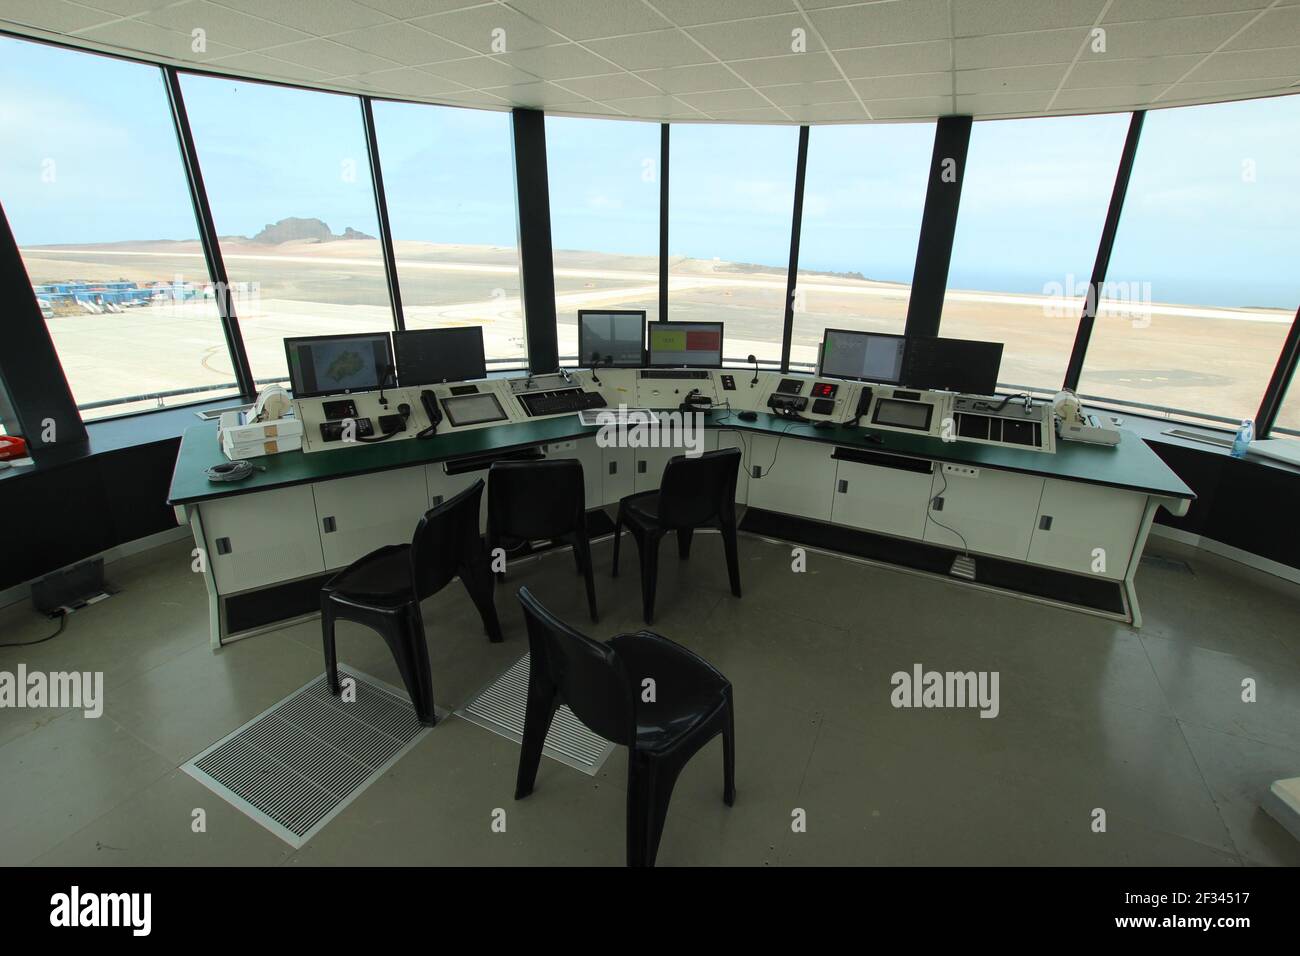 ST HELENA - OCTOBER 12, 2015: The nearly complete air traffic control tower at St Helena's first international airport Stock Photo